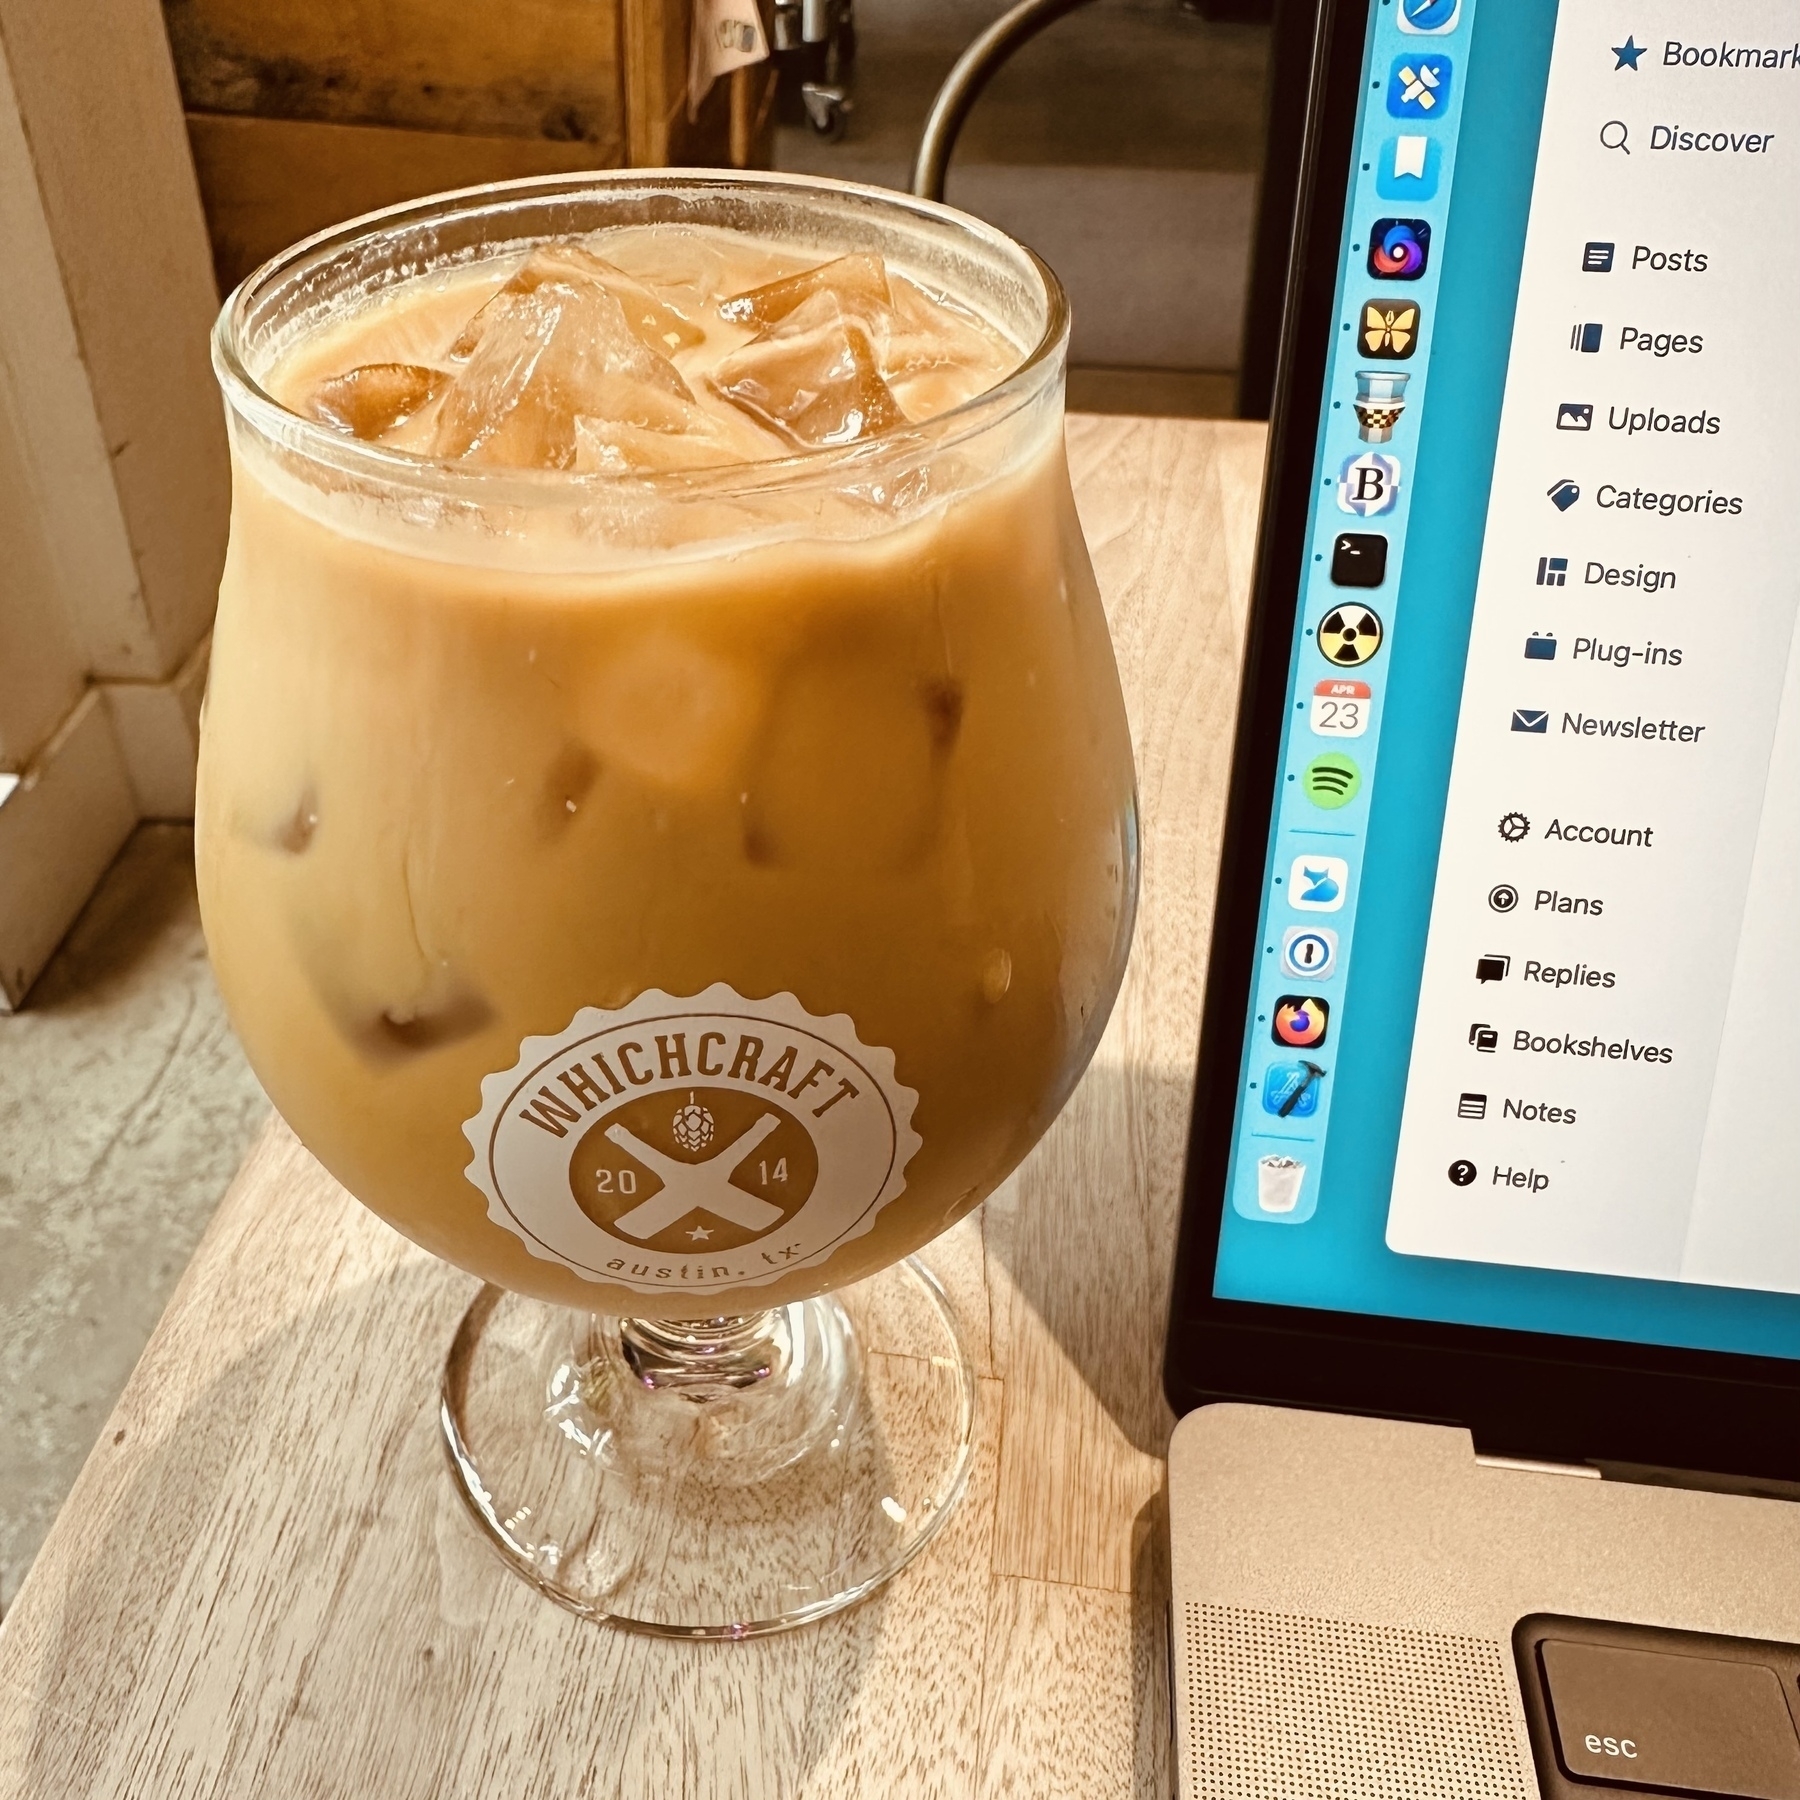 An iced latte in a nice glass next to a MacBook Pro with various Mac icons in the Dock, Micro.blog open in Safari, on a wooden table, with the word WhichCraft visible on the glass.